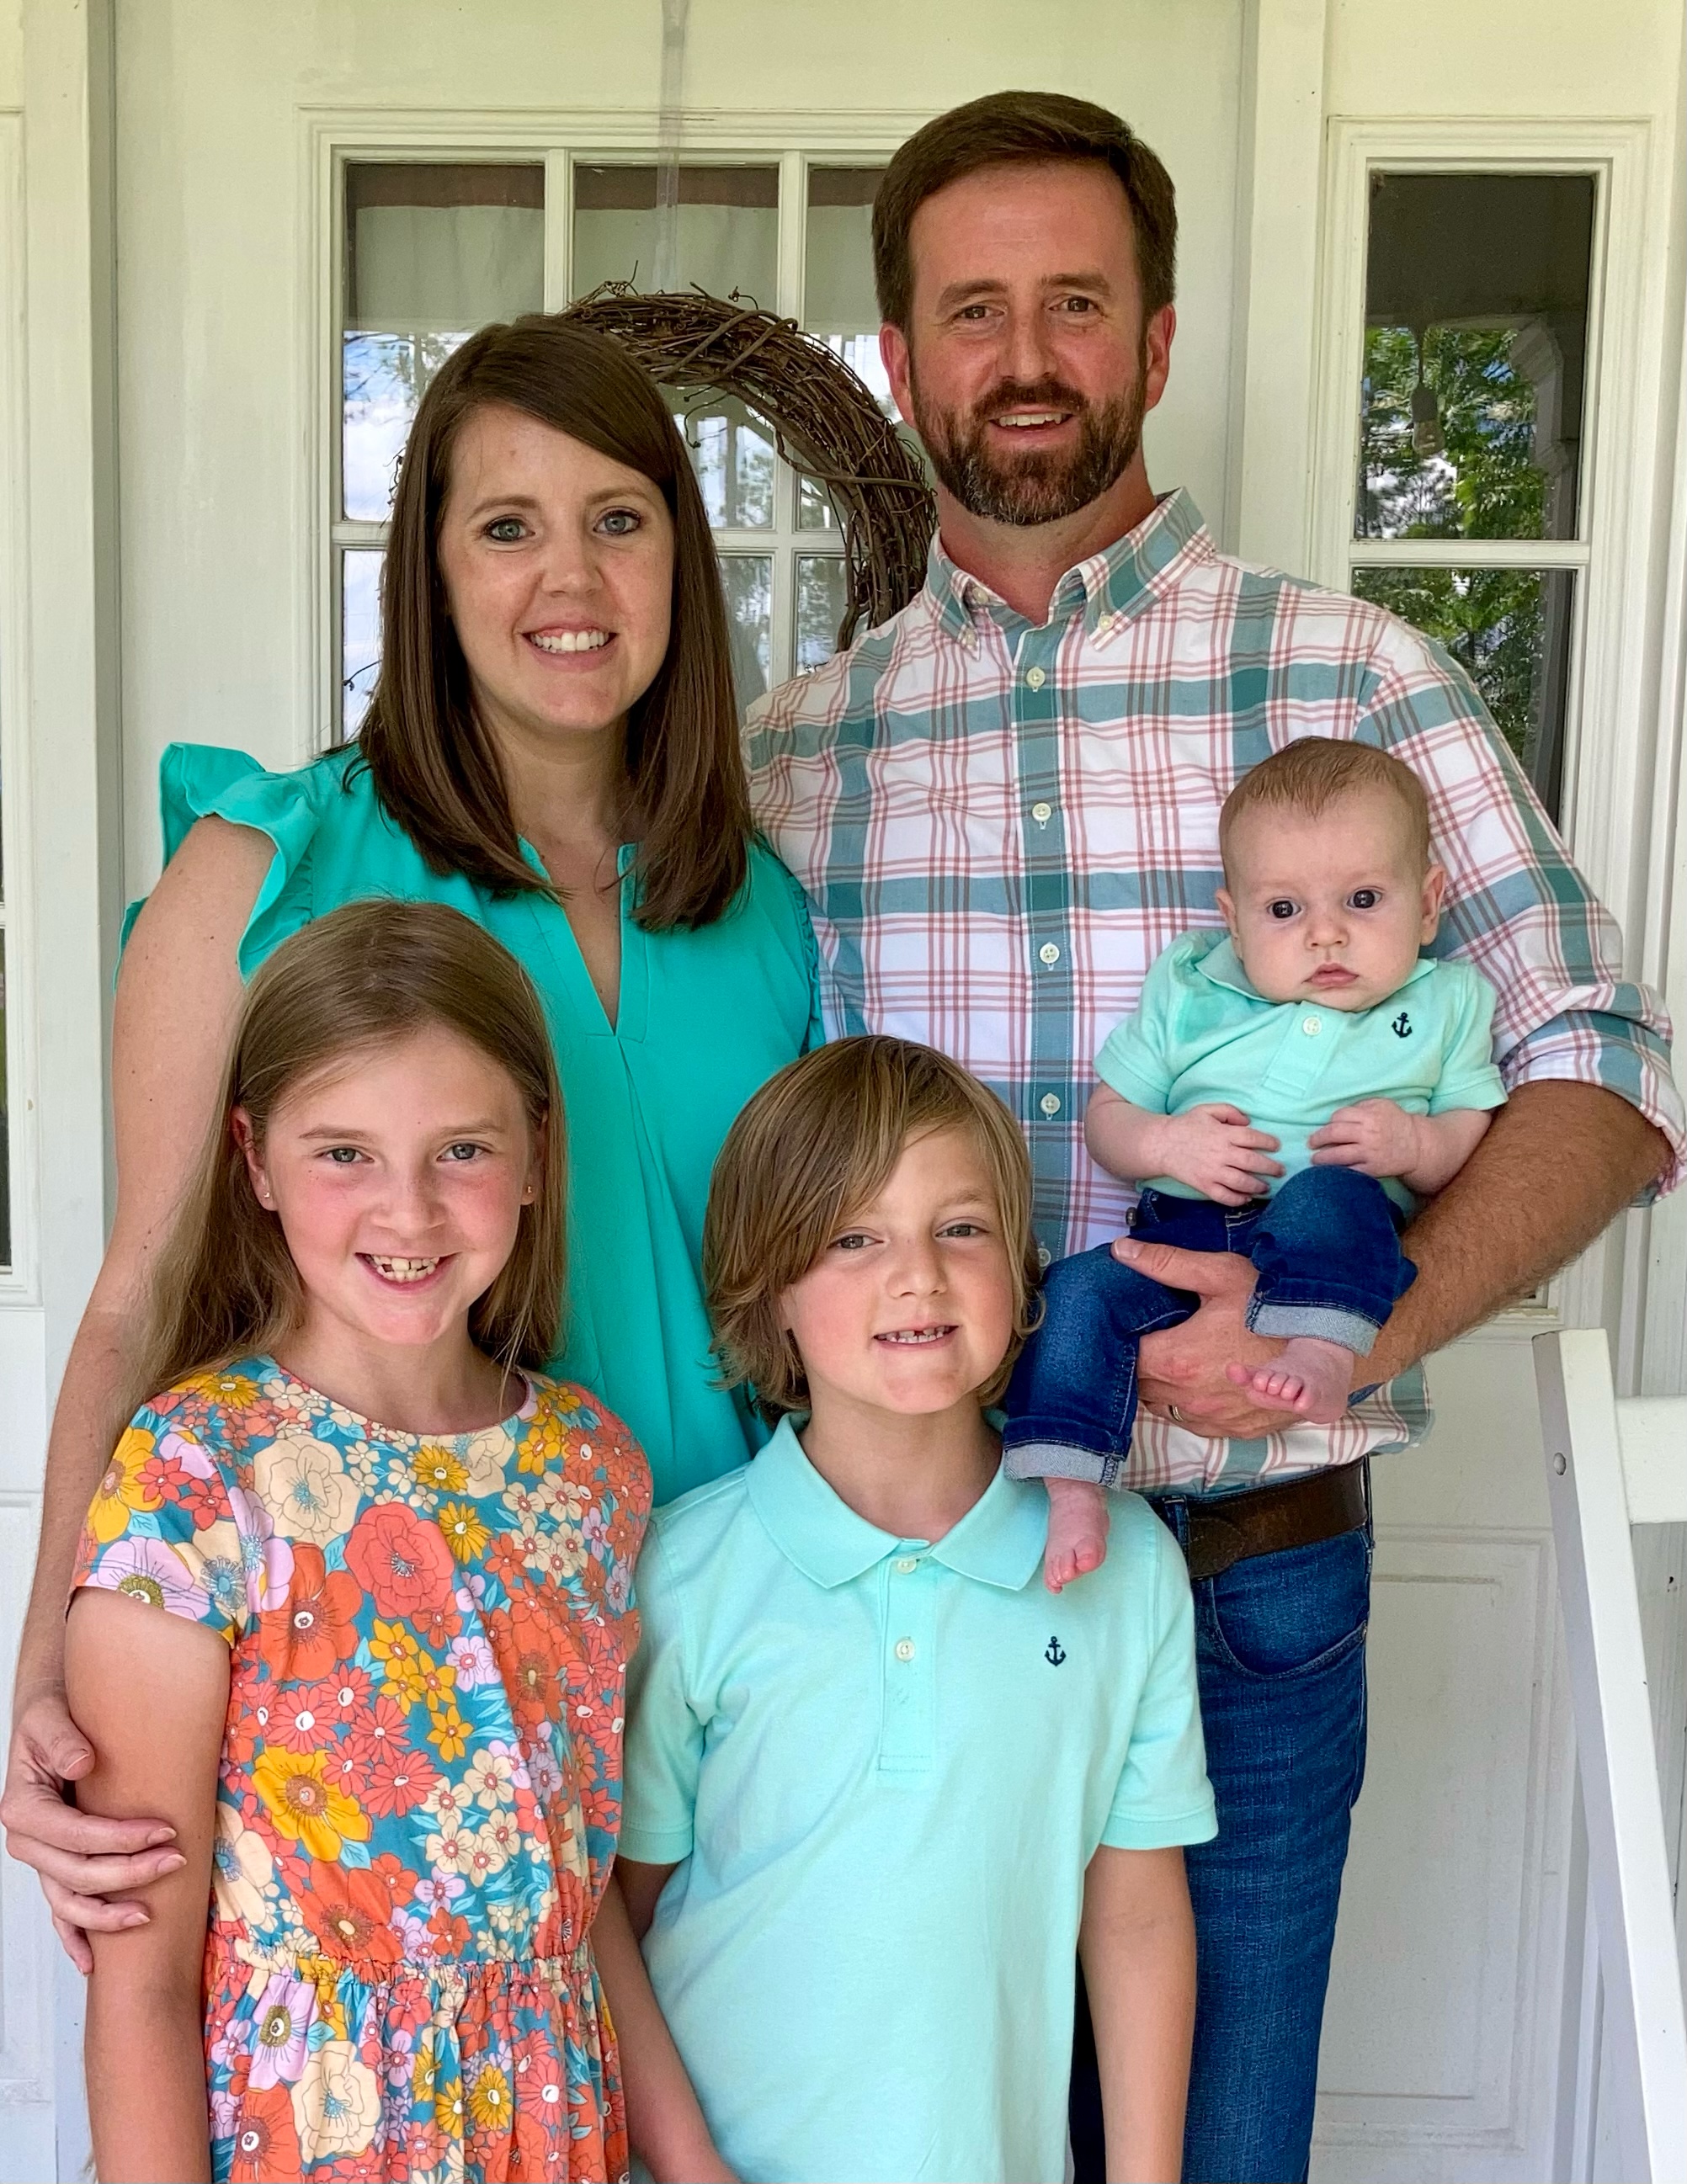 First Baptist Church Hilliard's Worship Pastor Jared Knight and family